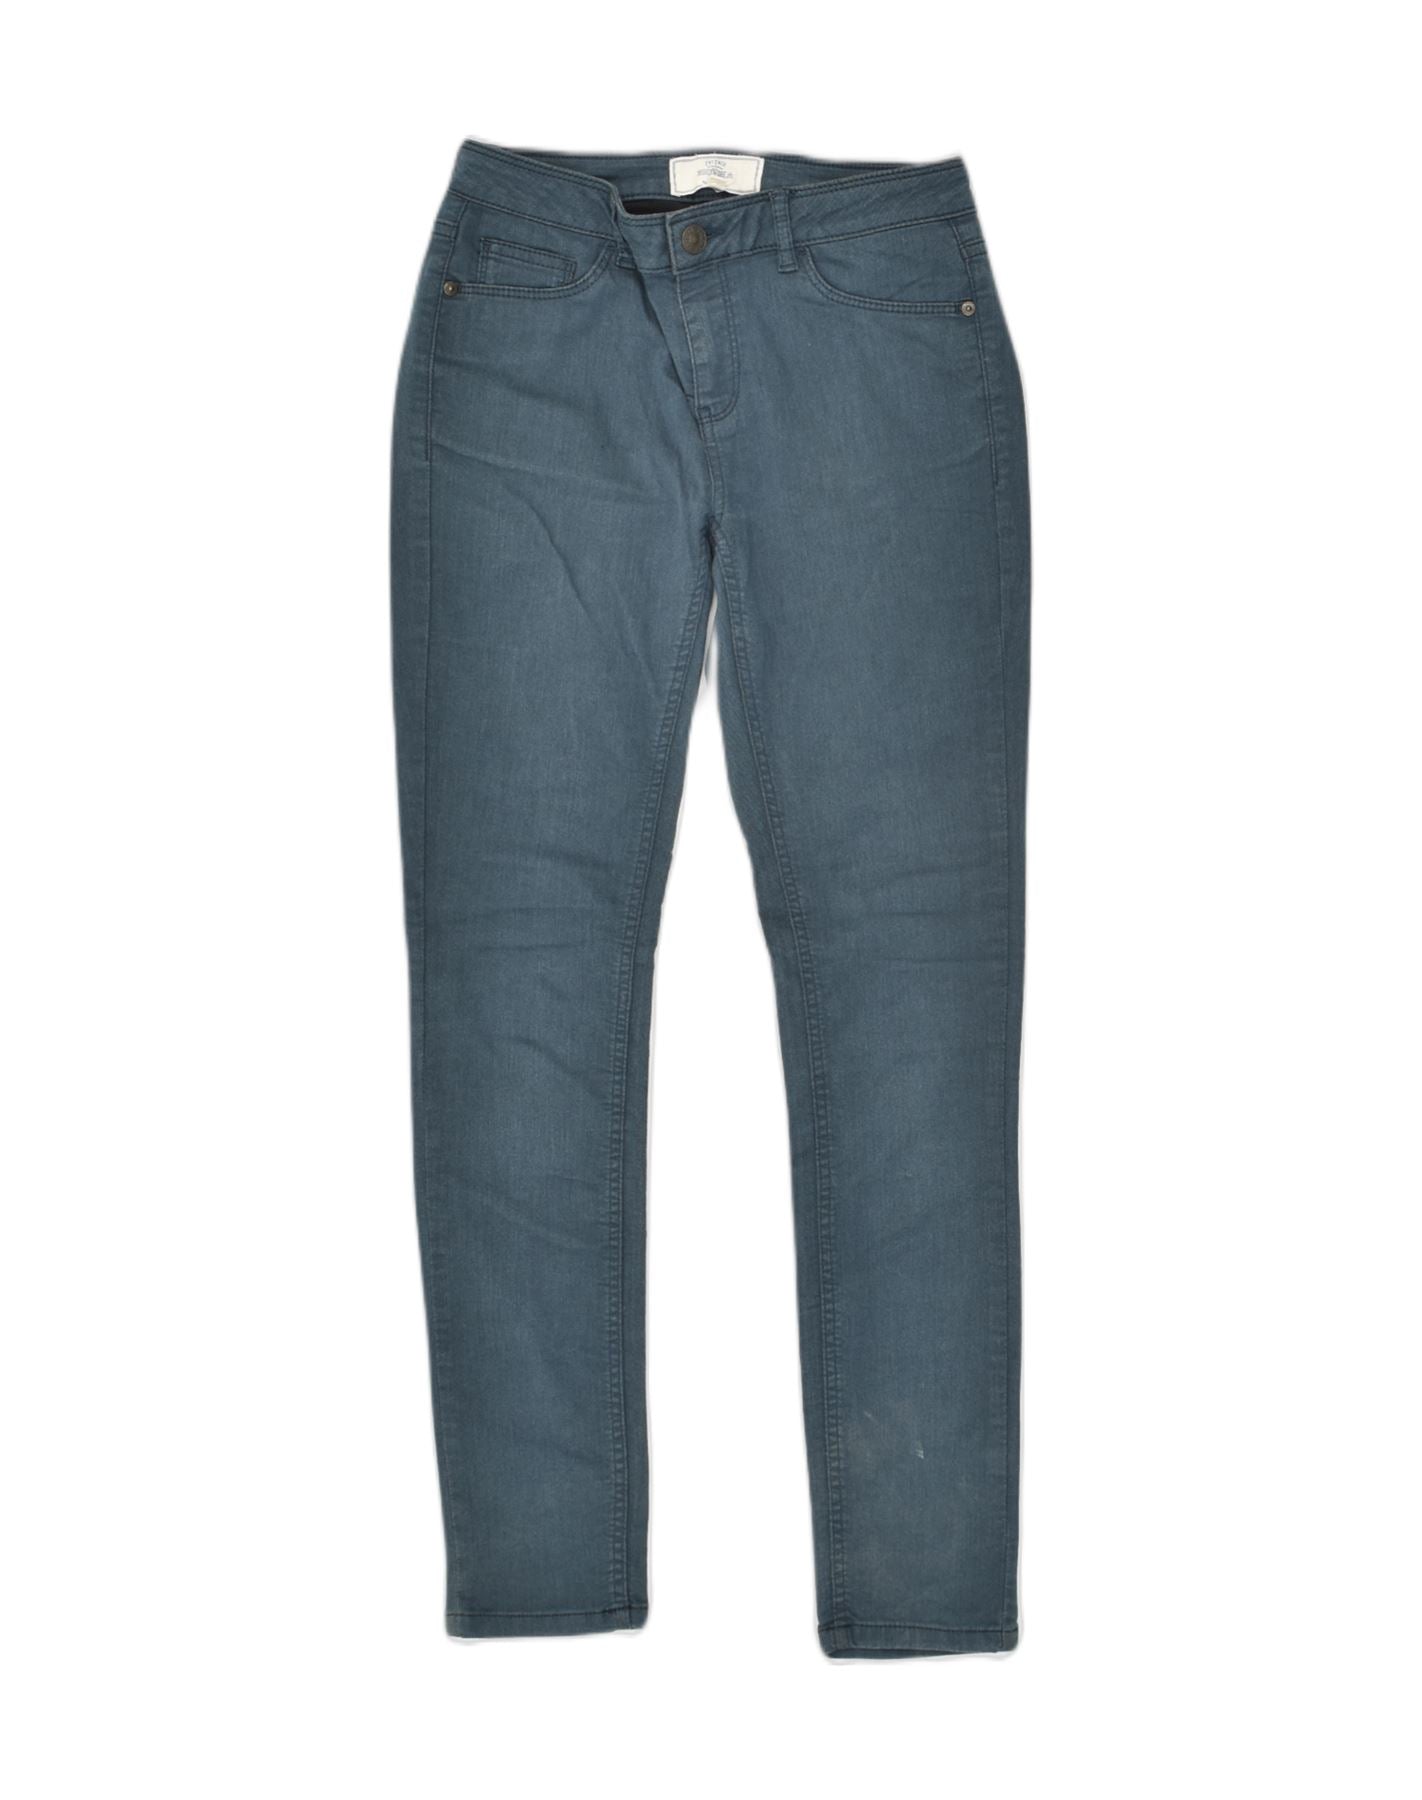 Harley-Davidson Women's Casual Trousers & Jeans | Maidstone H-D – Maidstone  Harley-Davidson